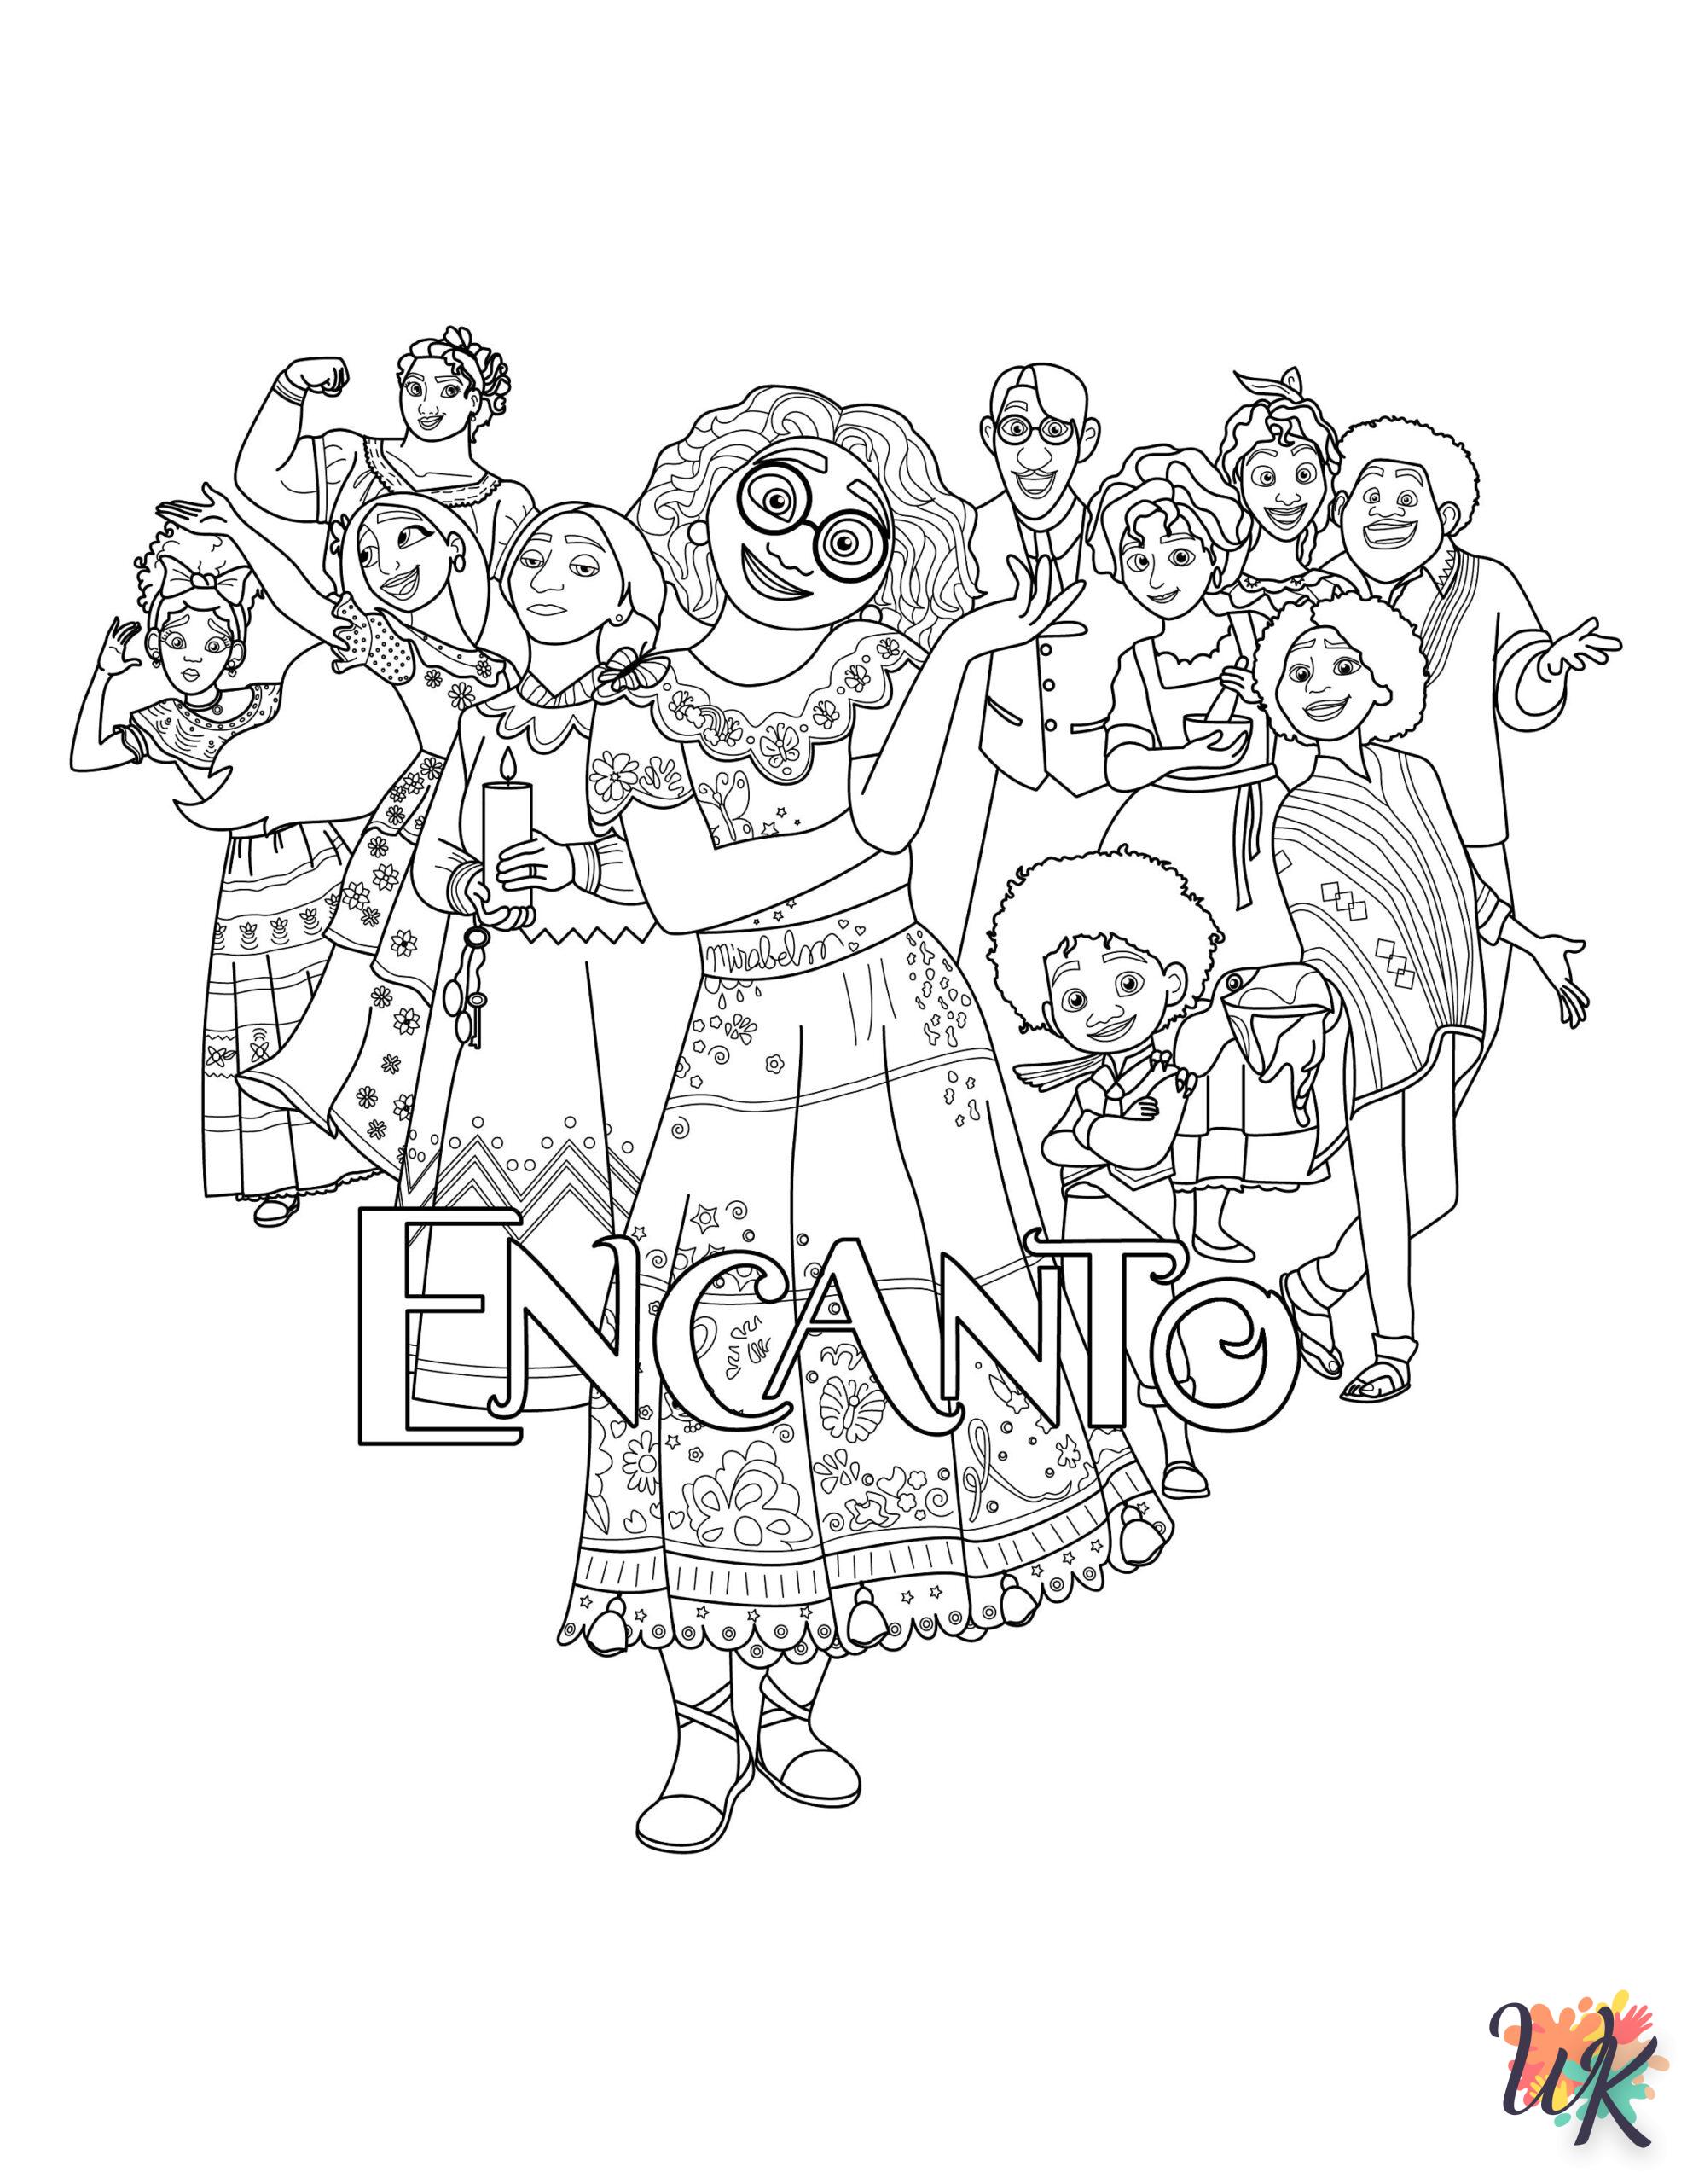 old-fashioned Encanto coloring pages